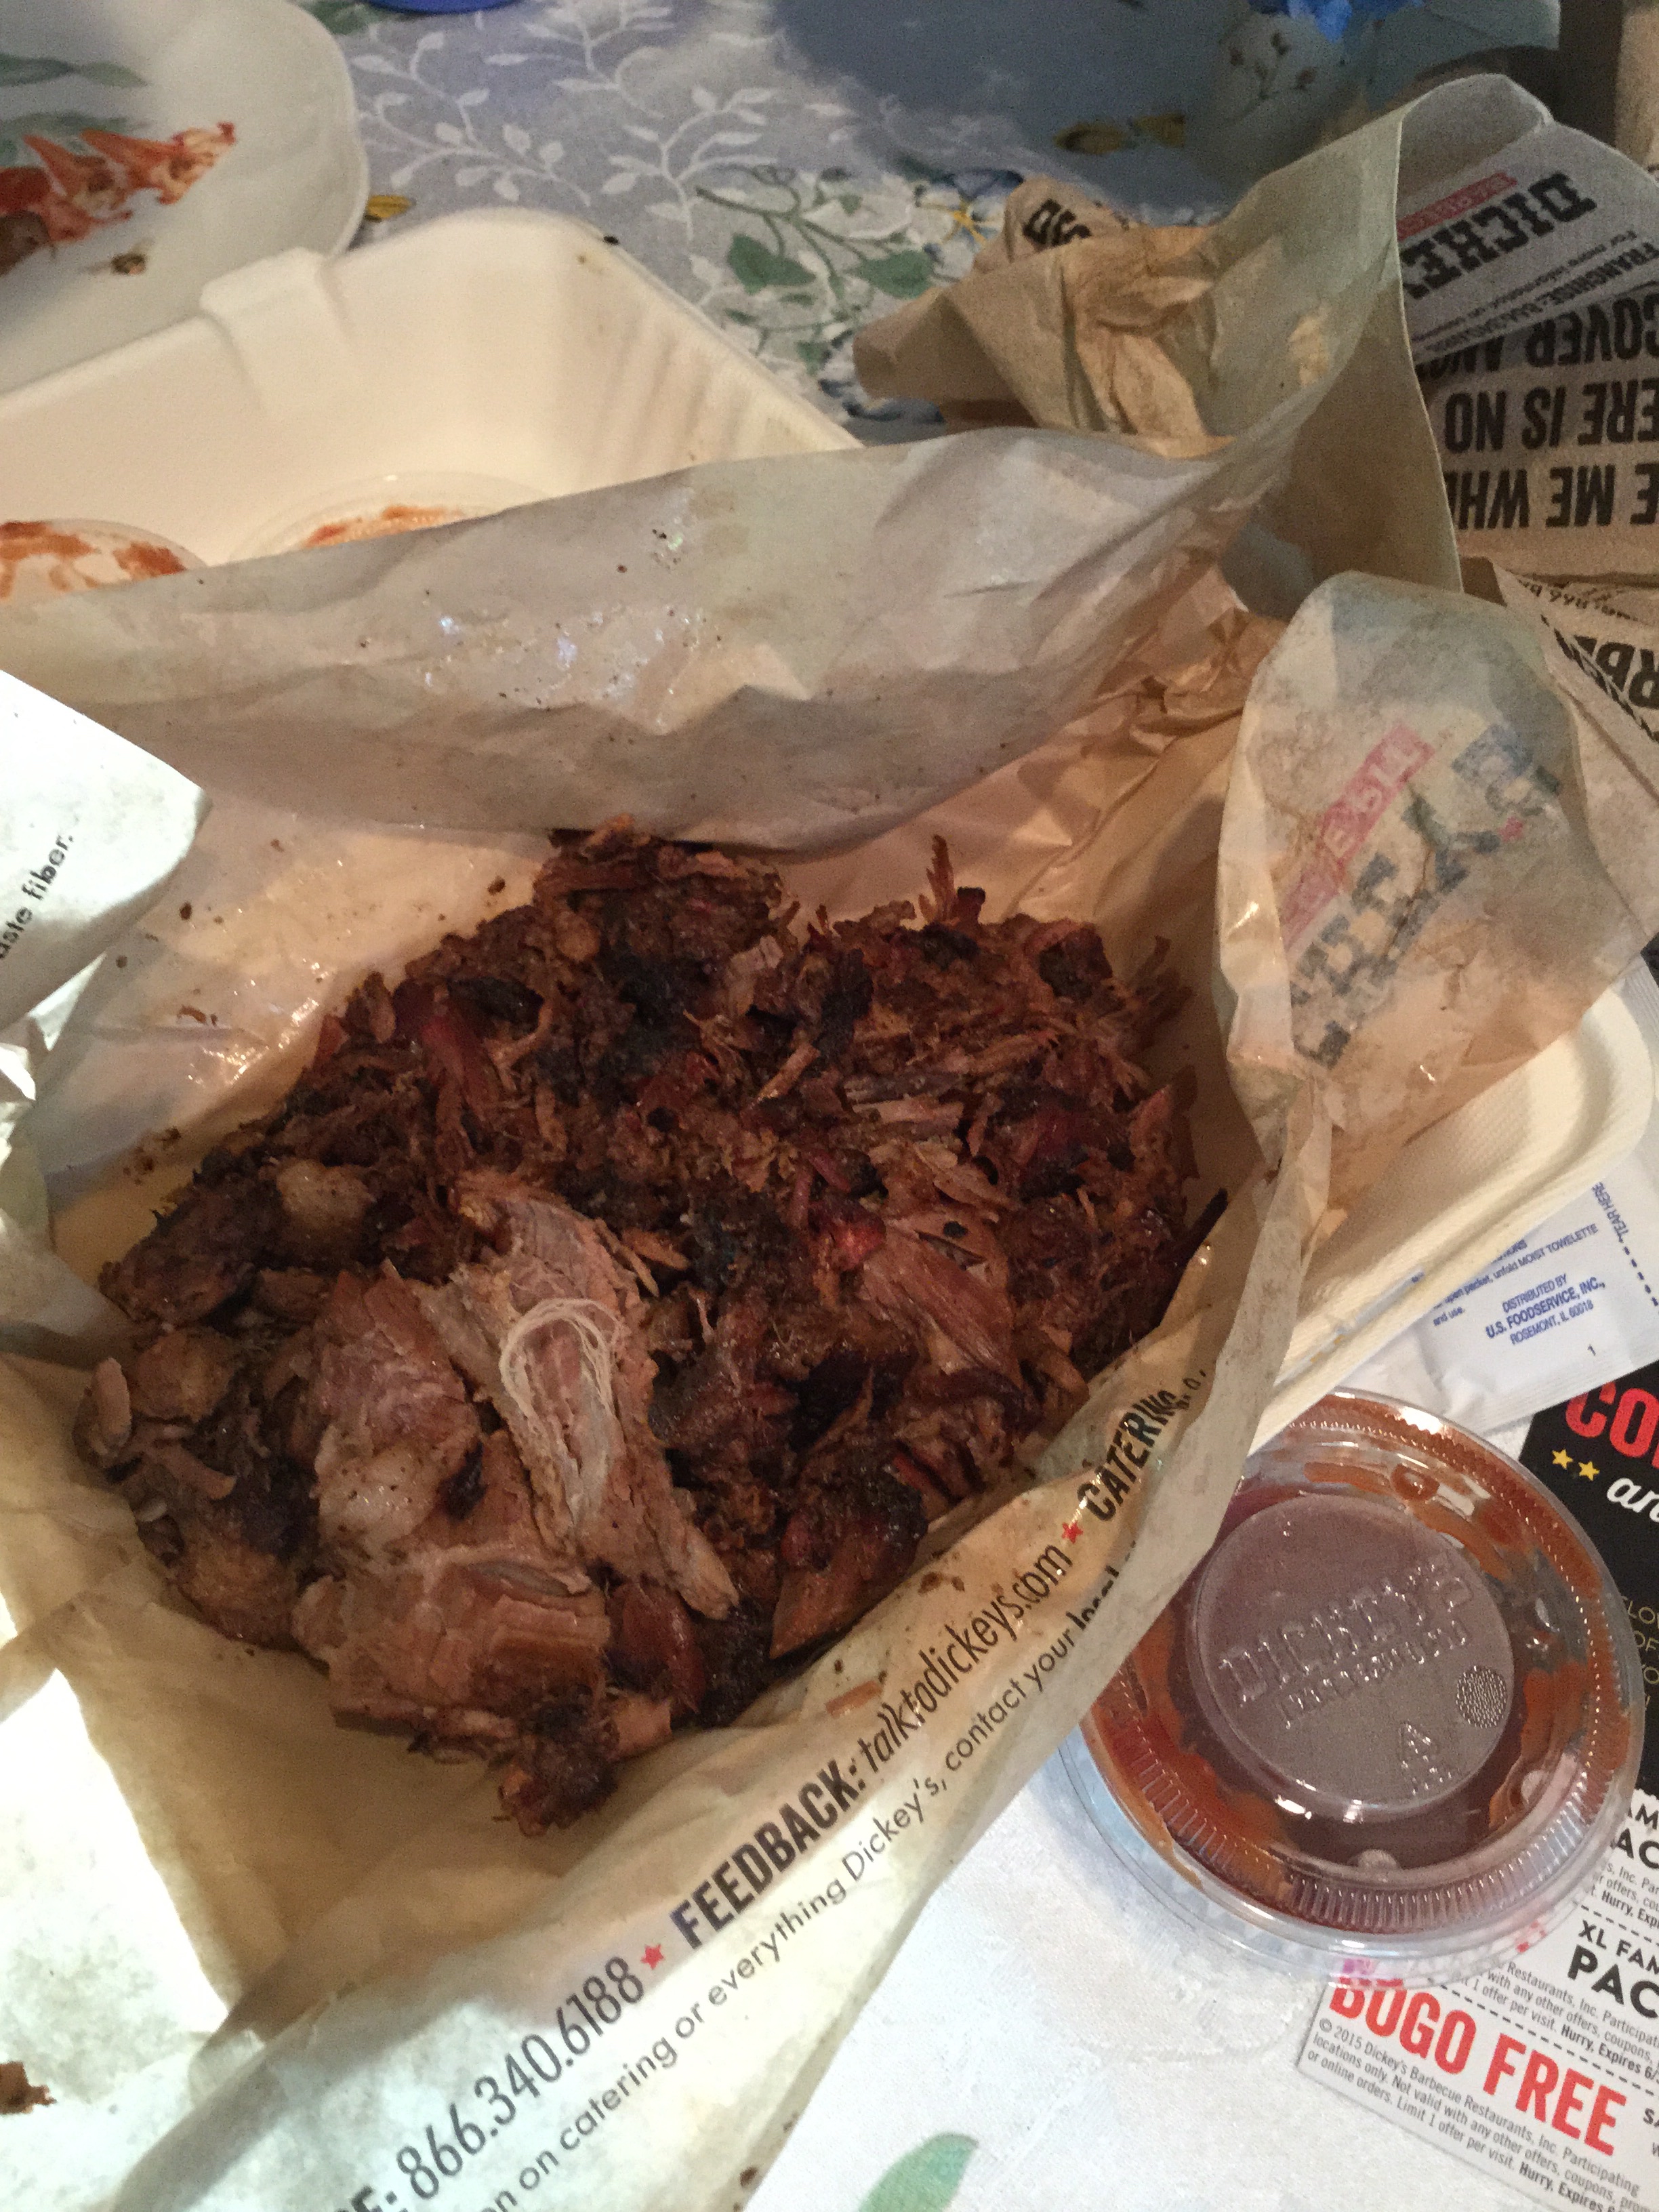 pulled pork from Dickies bbq (another Issaquah restaurant)